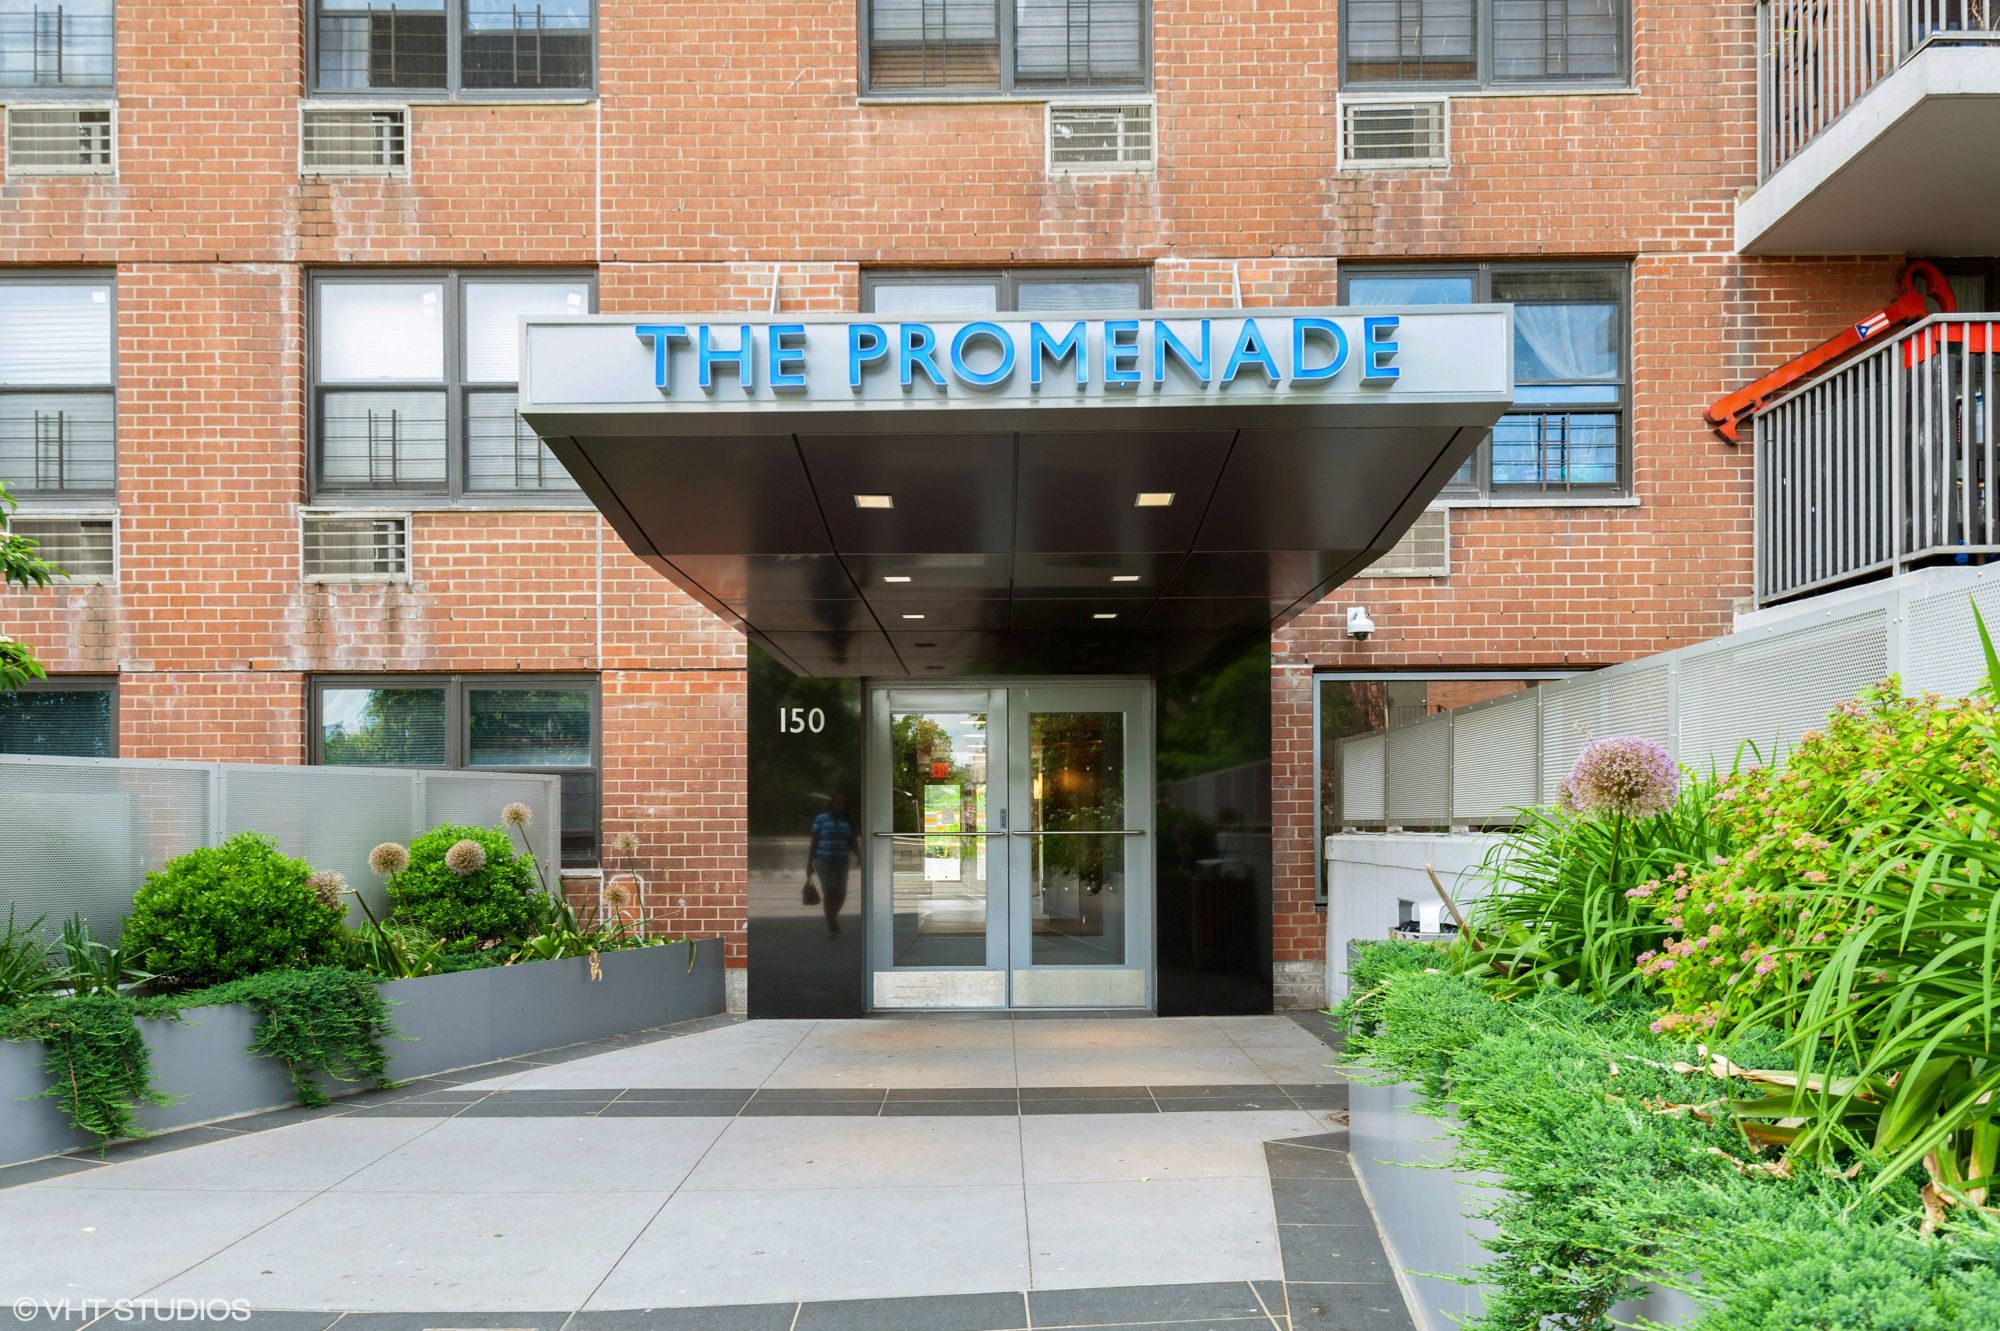 The Lobby entrance of The Promenade, located at 150 West 250th Street, as seen from the entry walkway.